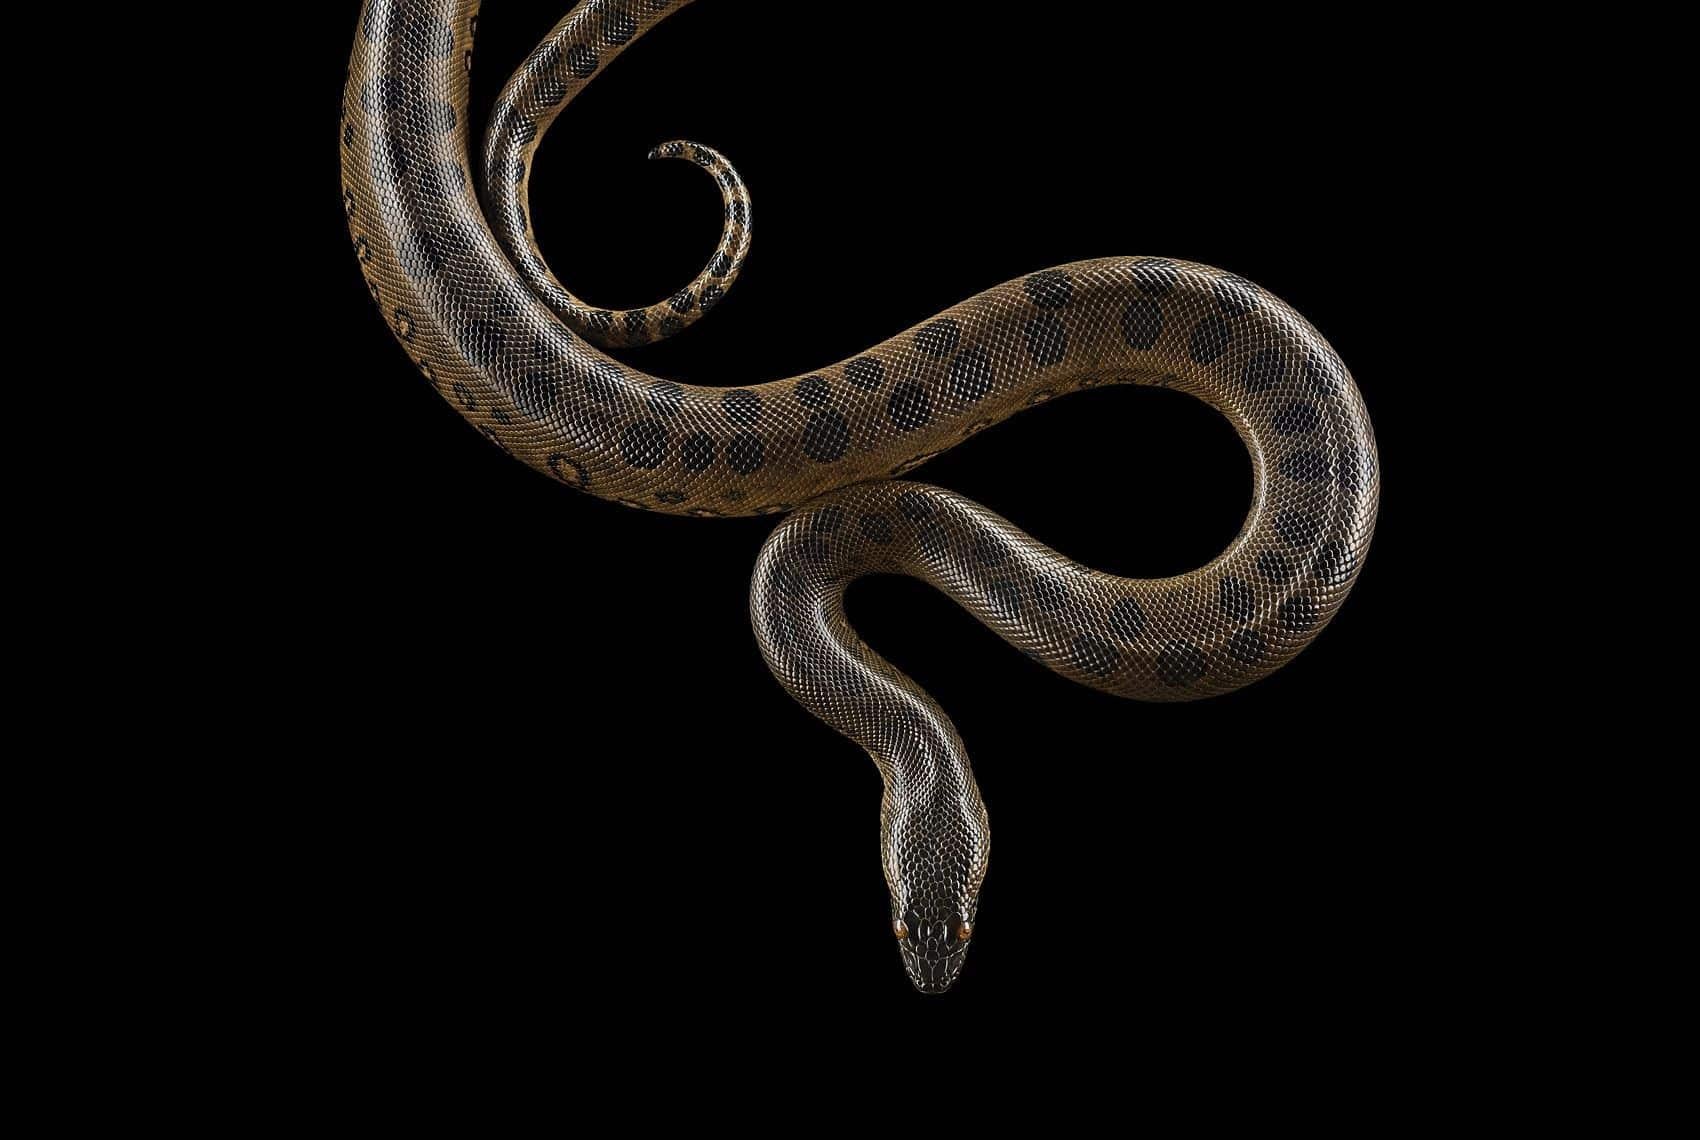 'Green Anaconda #1, Albuquerque, NM, 2013' is a limited-edition photograph by contemporary artist Brad Wilson from the ‘Affinity’ series which features studio portraits of wild animals. 

This photograph is sold unframed as a print only. It is